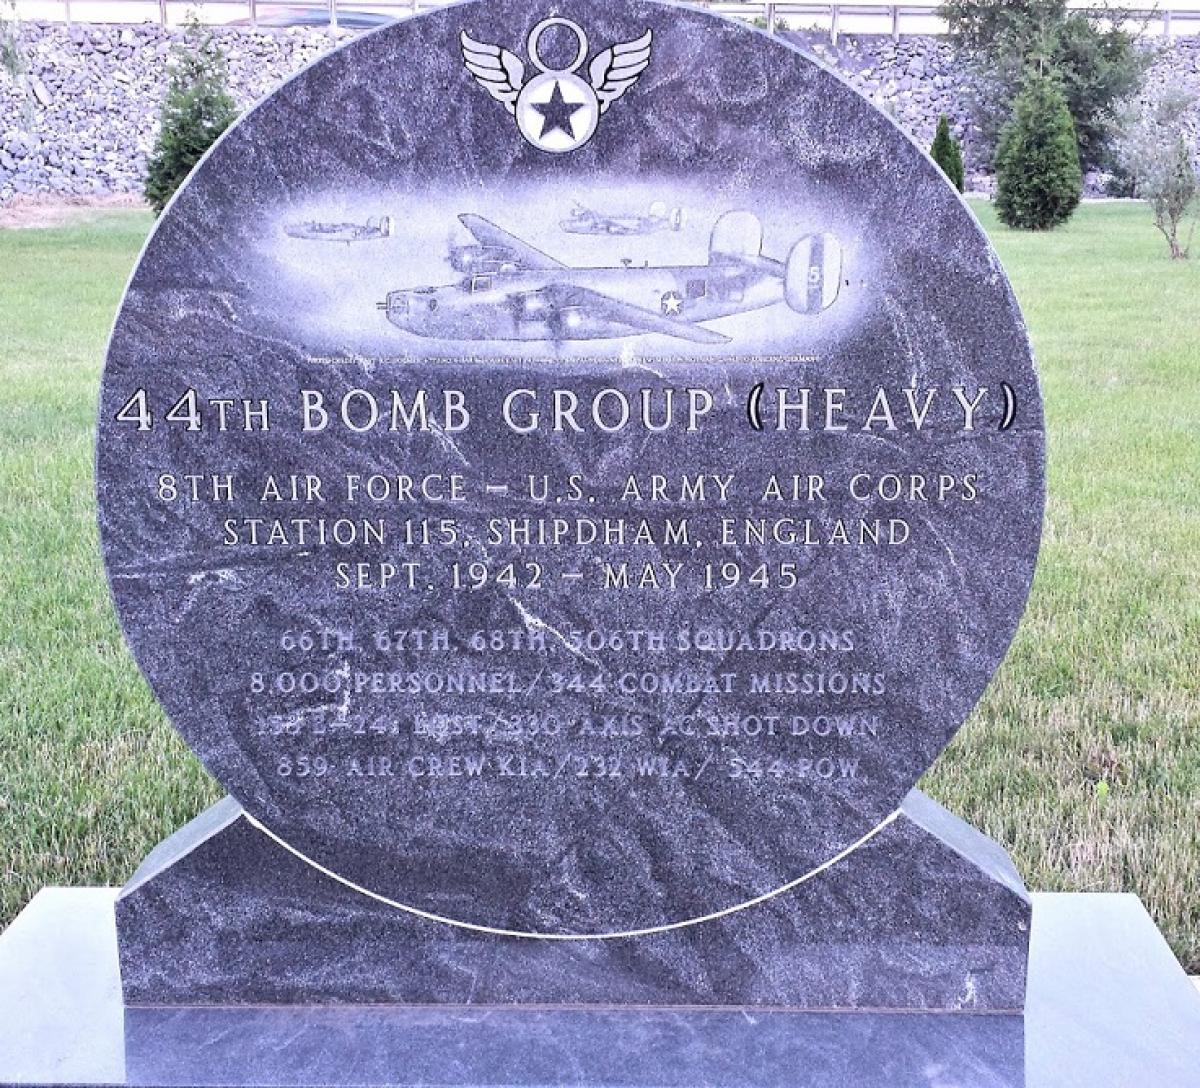 OK, Grove, Headstone Symbols and Meanings, U. S. Air Force 44th Bomb Group (Flying 8 Balls)